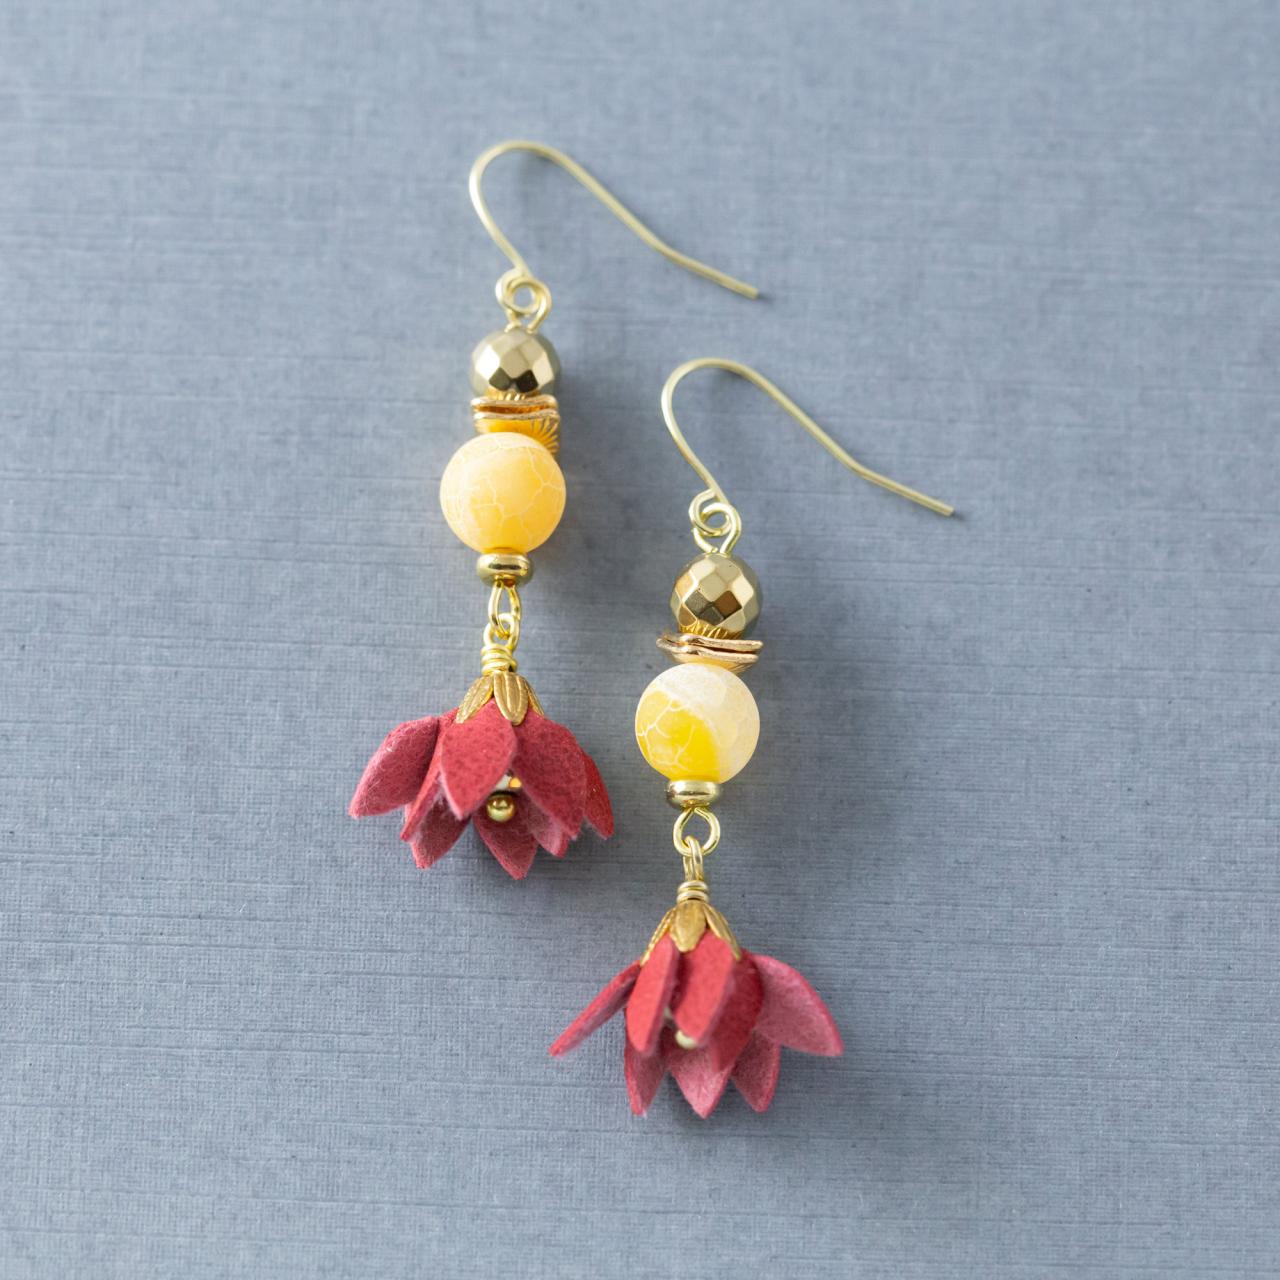 Faux Leather Boho Red Flower Dangle Earrings With Yellow Agate, Faux Leather Jewelry